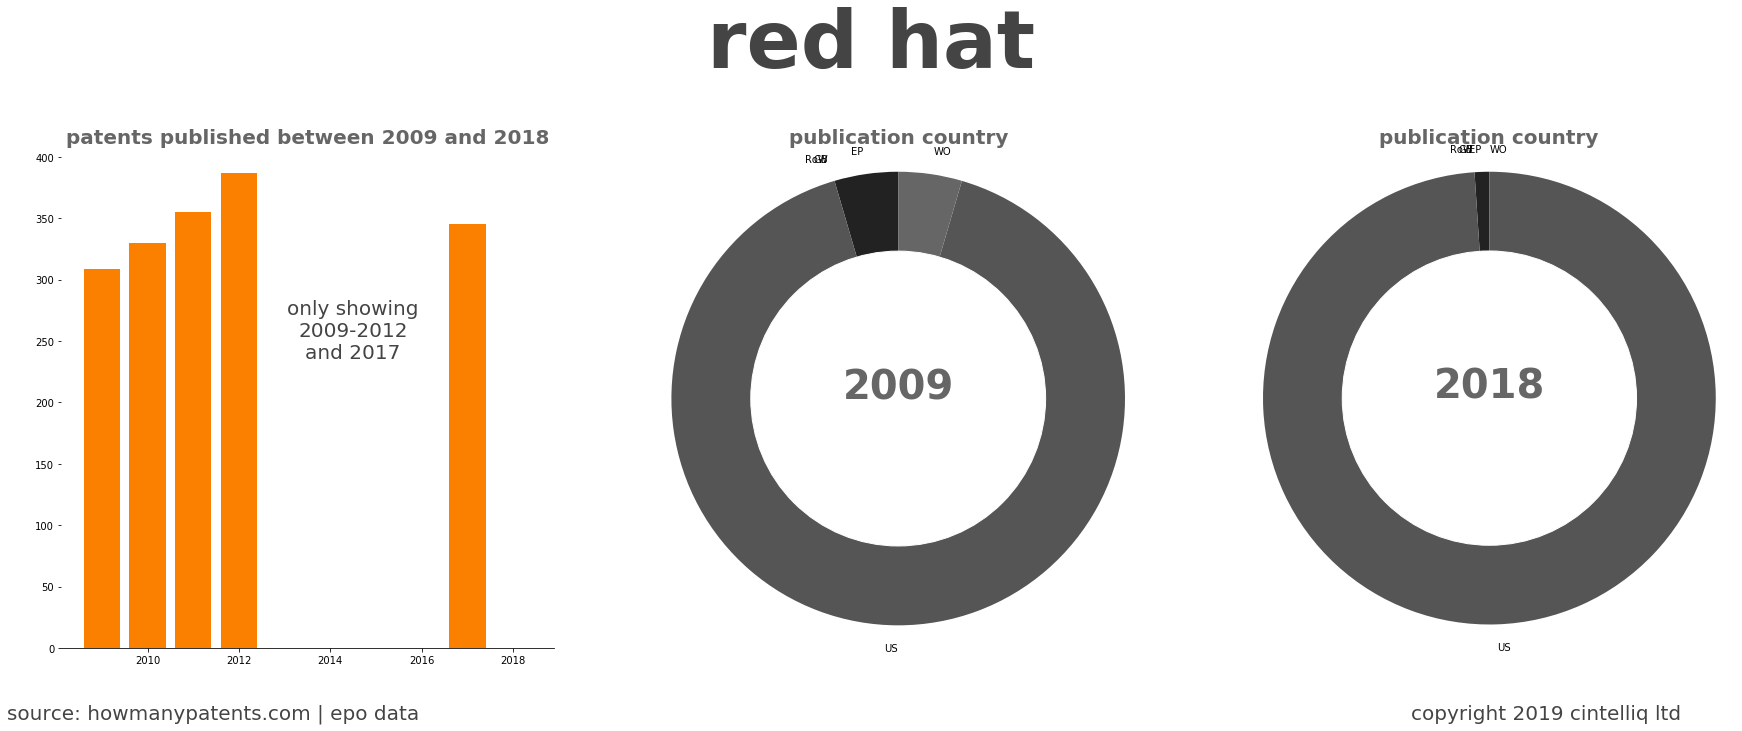 summary of patents for Red Hat